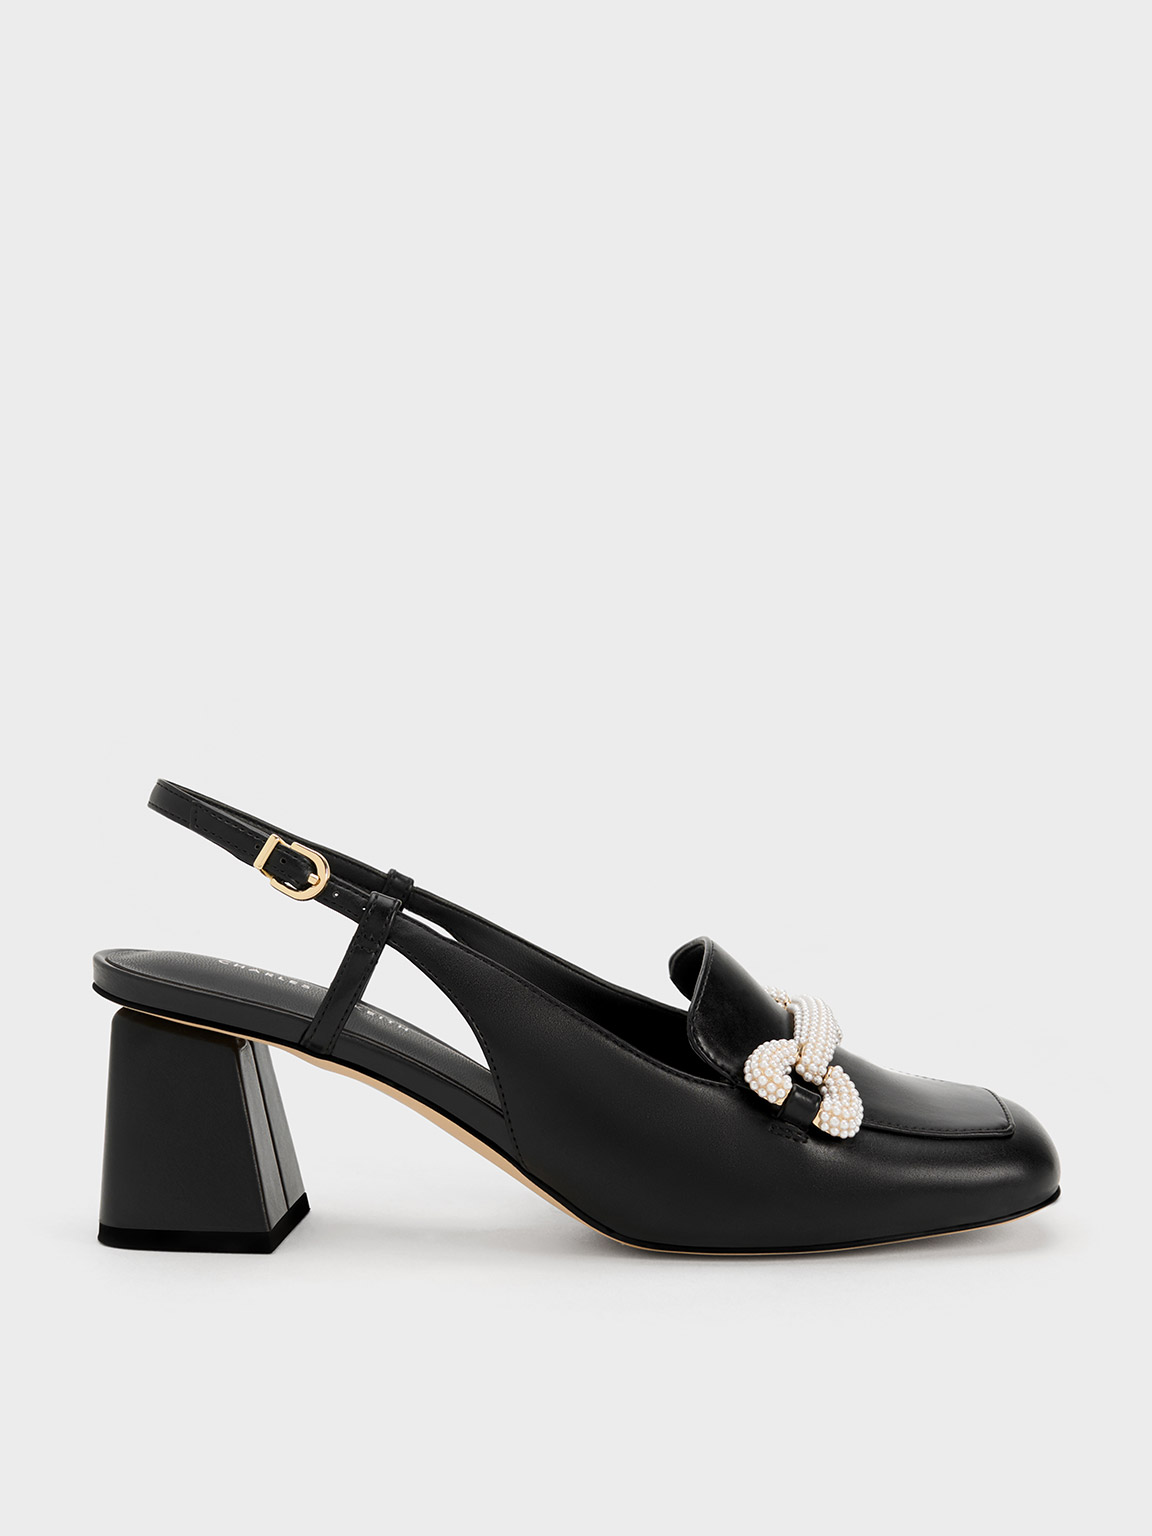 Black Beaded Slingback Loafer Pumps - CHARLES & KEITH KW